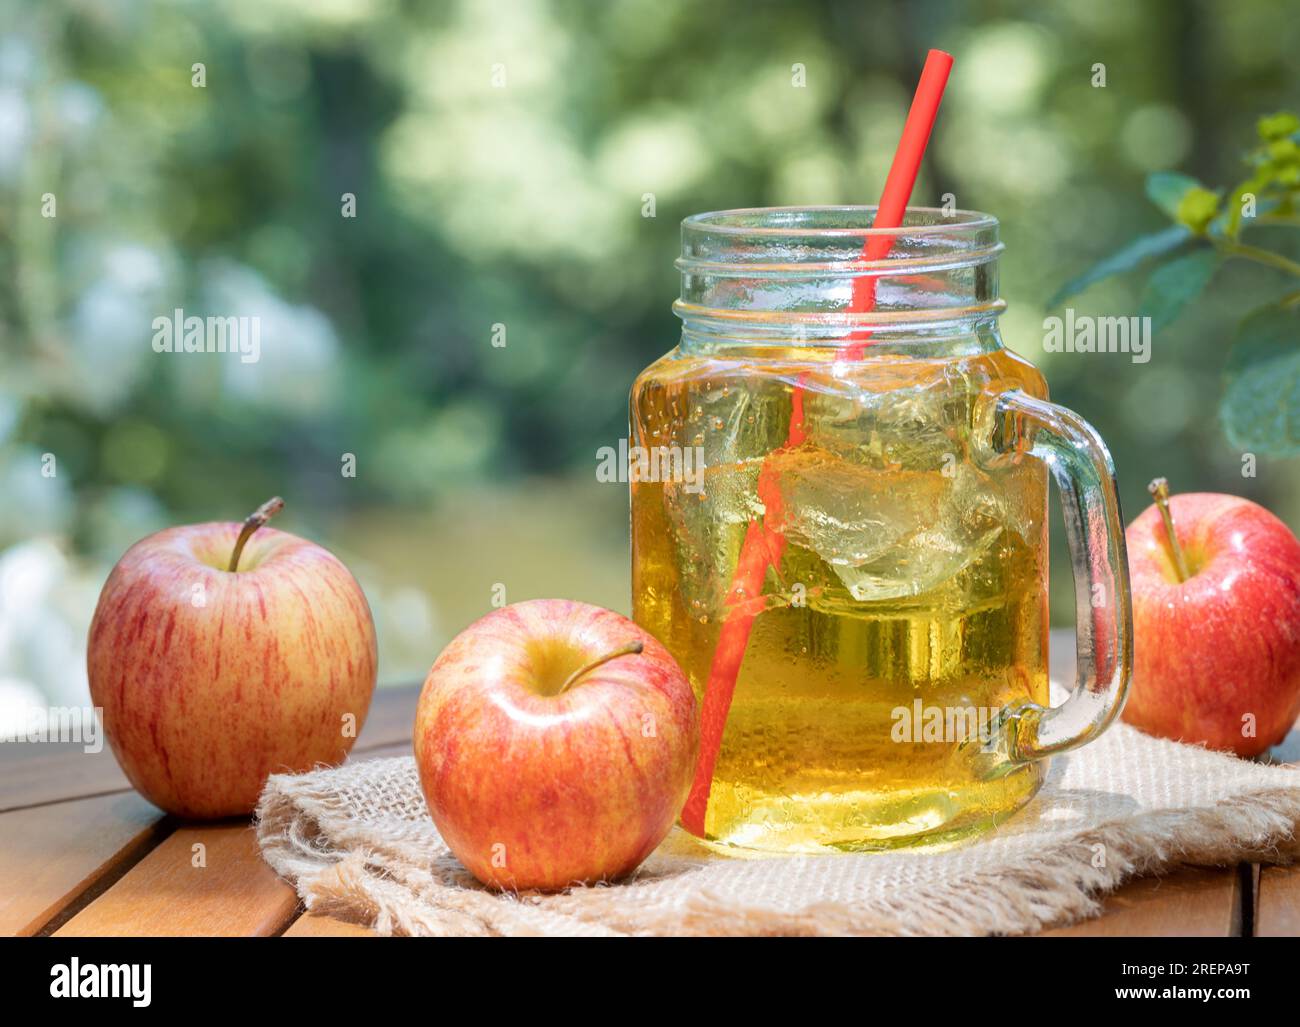 Cold apple juice in glass jar and fresh red apples outdoors on wooden patio table with nature background Stock Photo